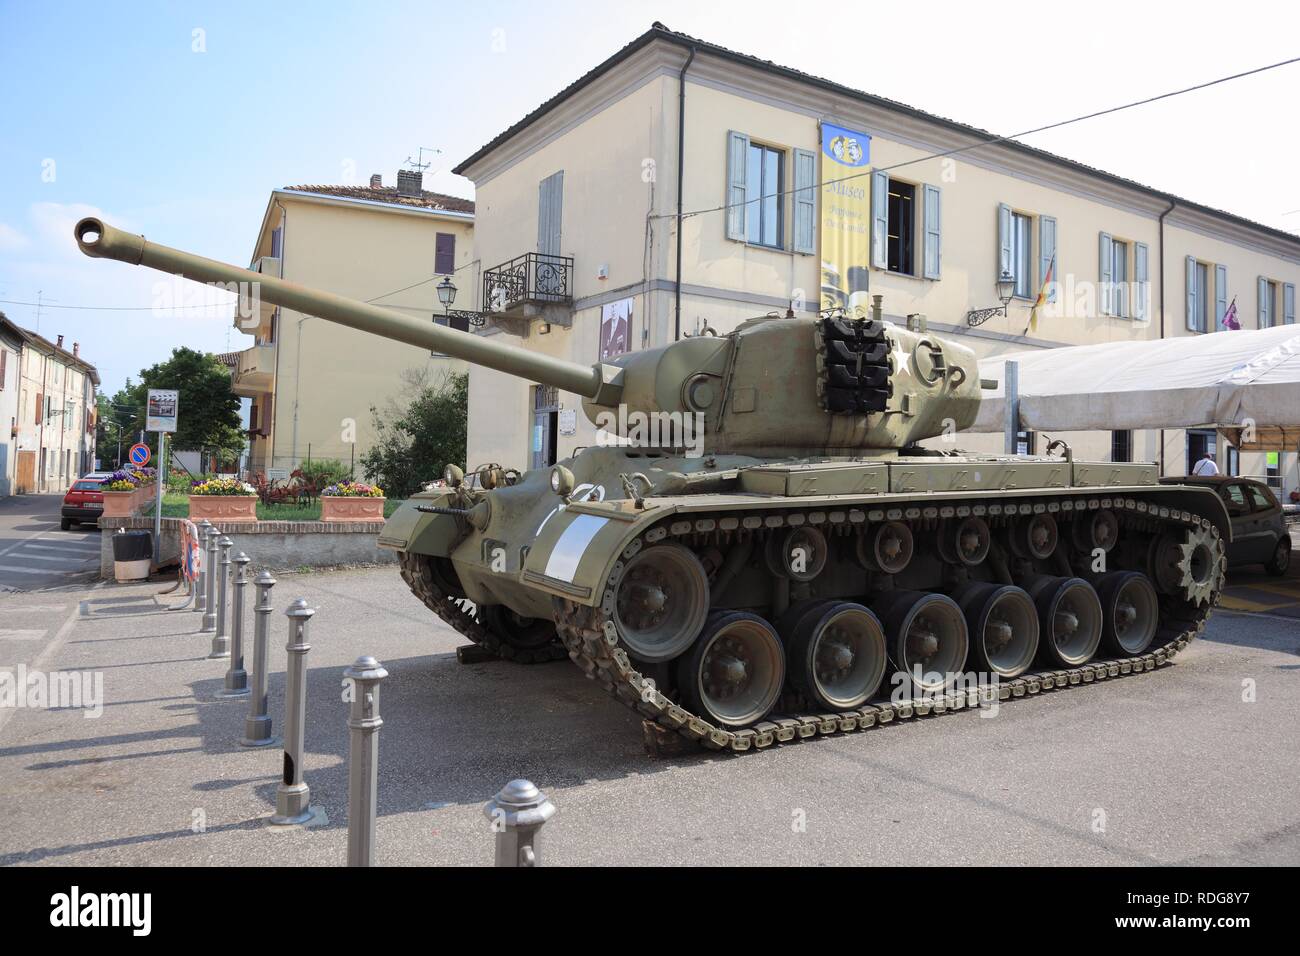 The famous tank from the Don Camillo movie in front of the Don Camillo and Peppone Museum in Brescello, Emilia Romagna, Italy Stock Photo